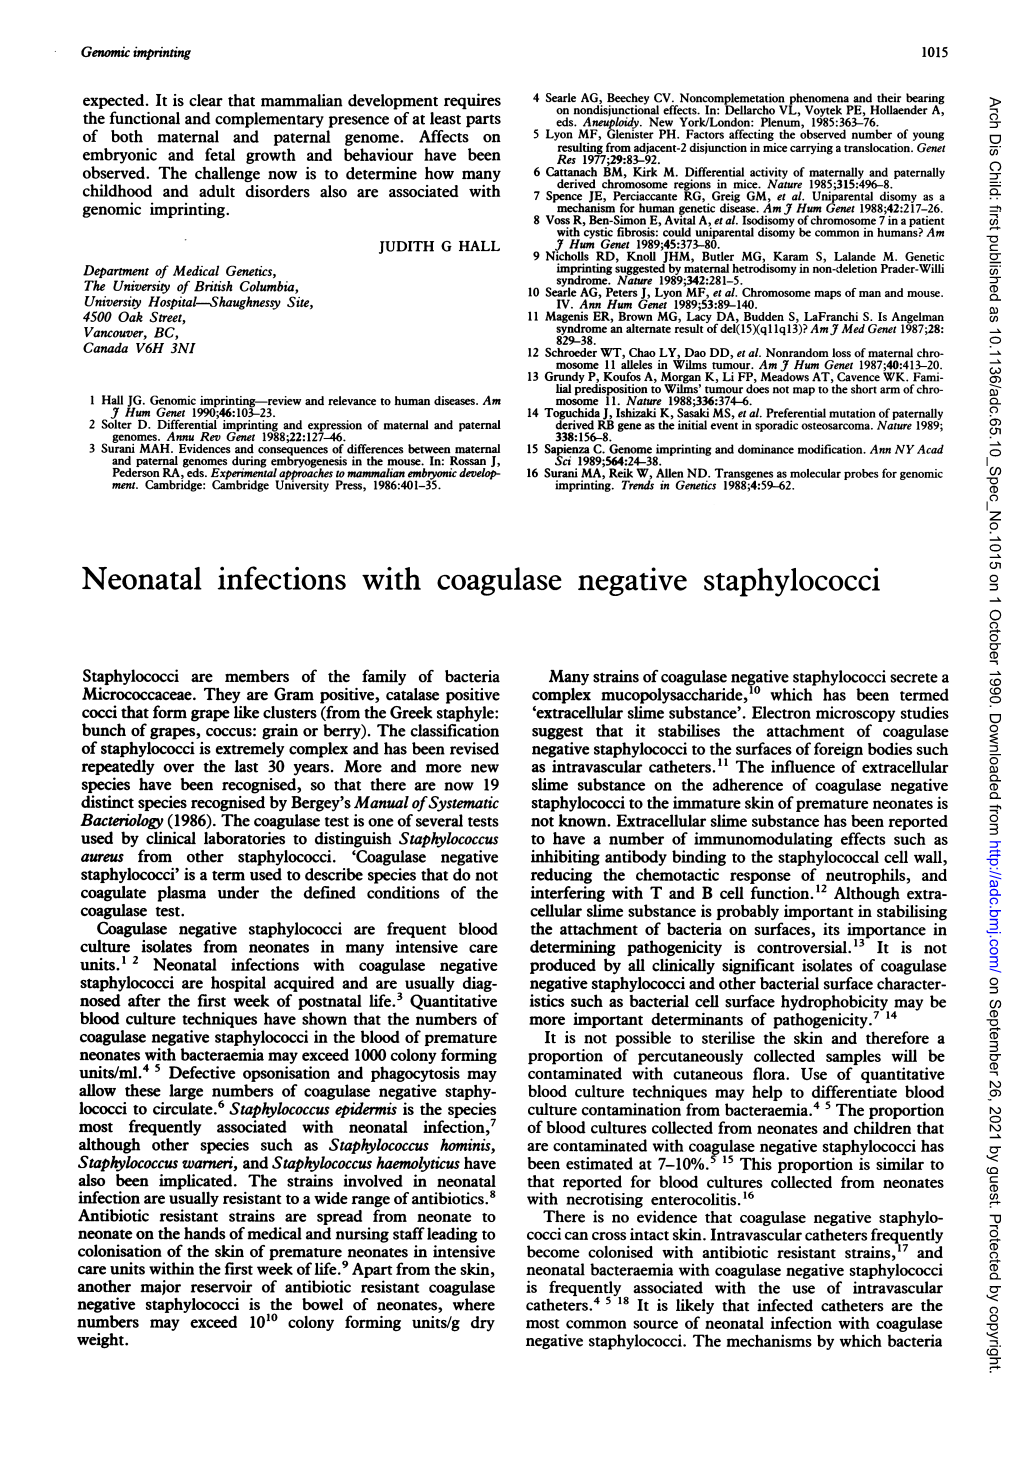 Neonatal Infections with Coagulase Negative Staphylococci